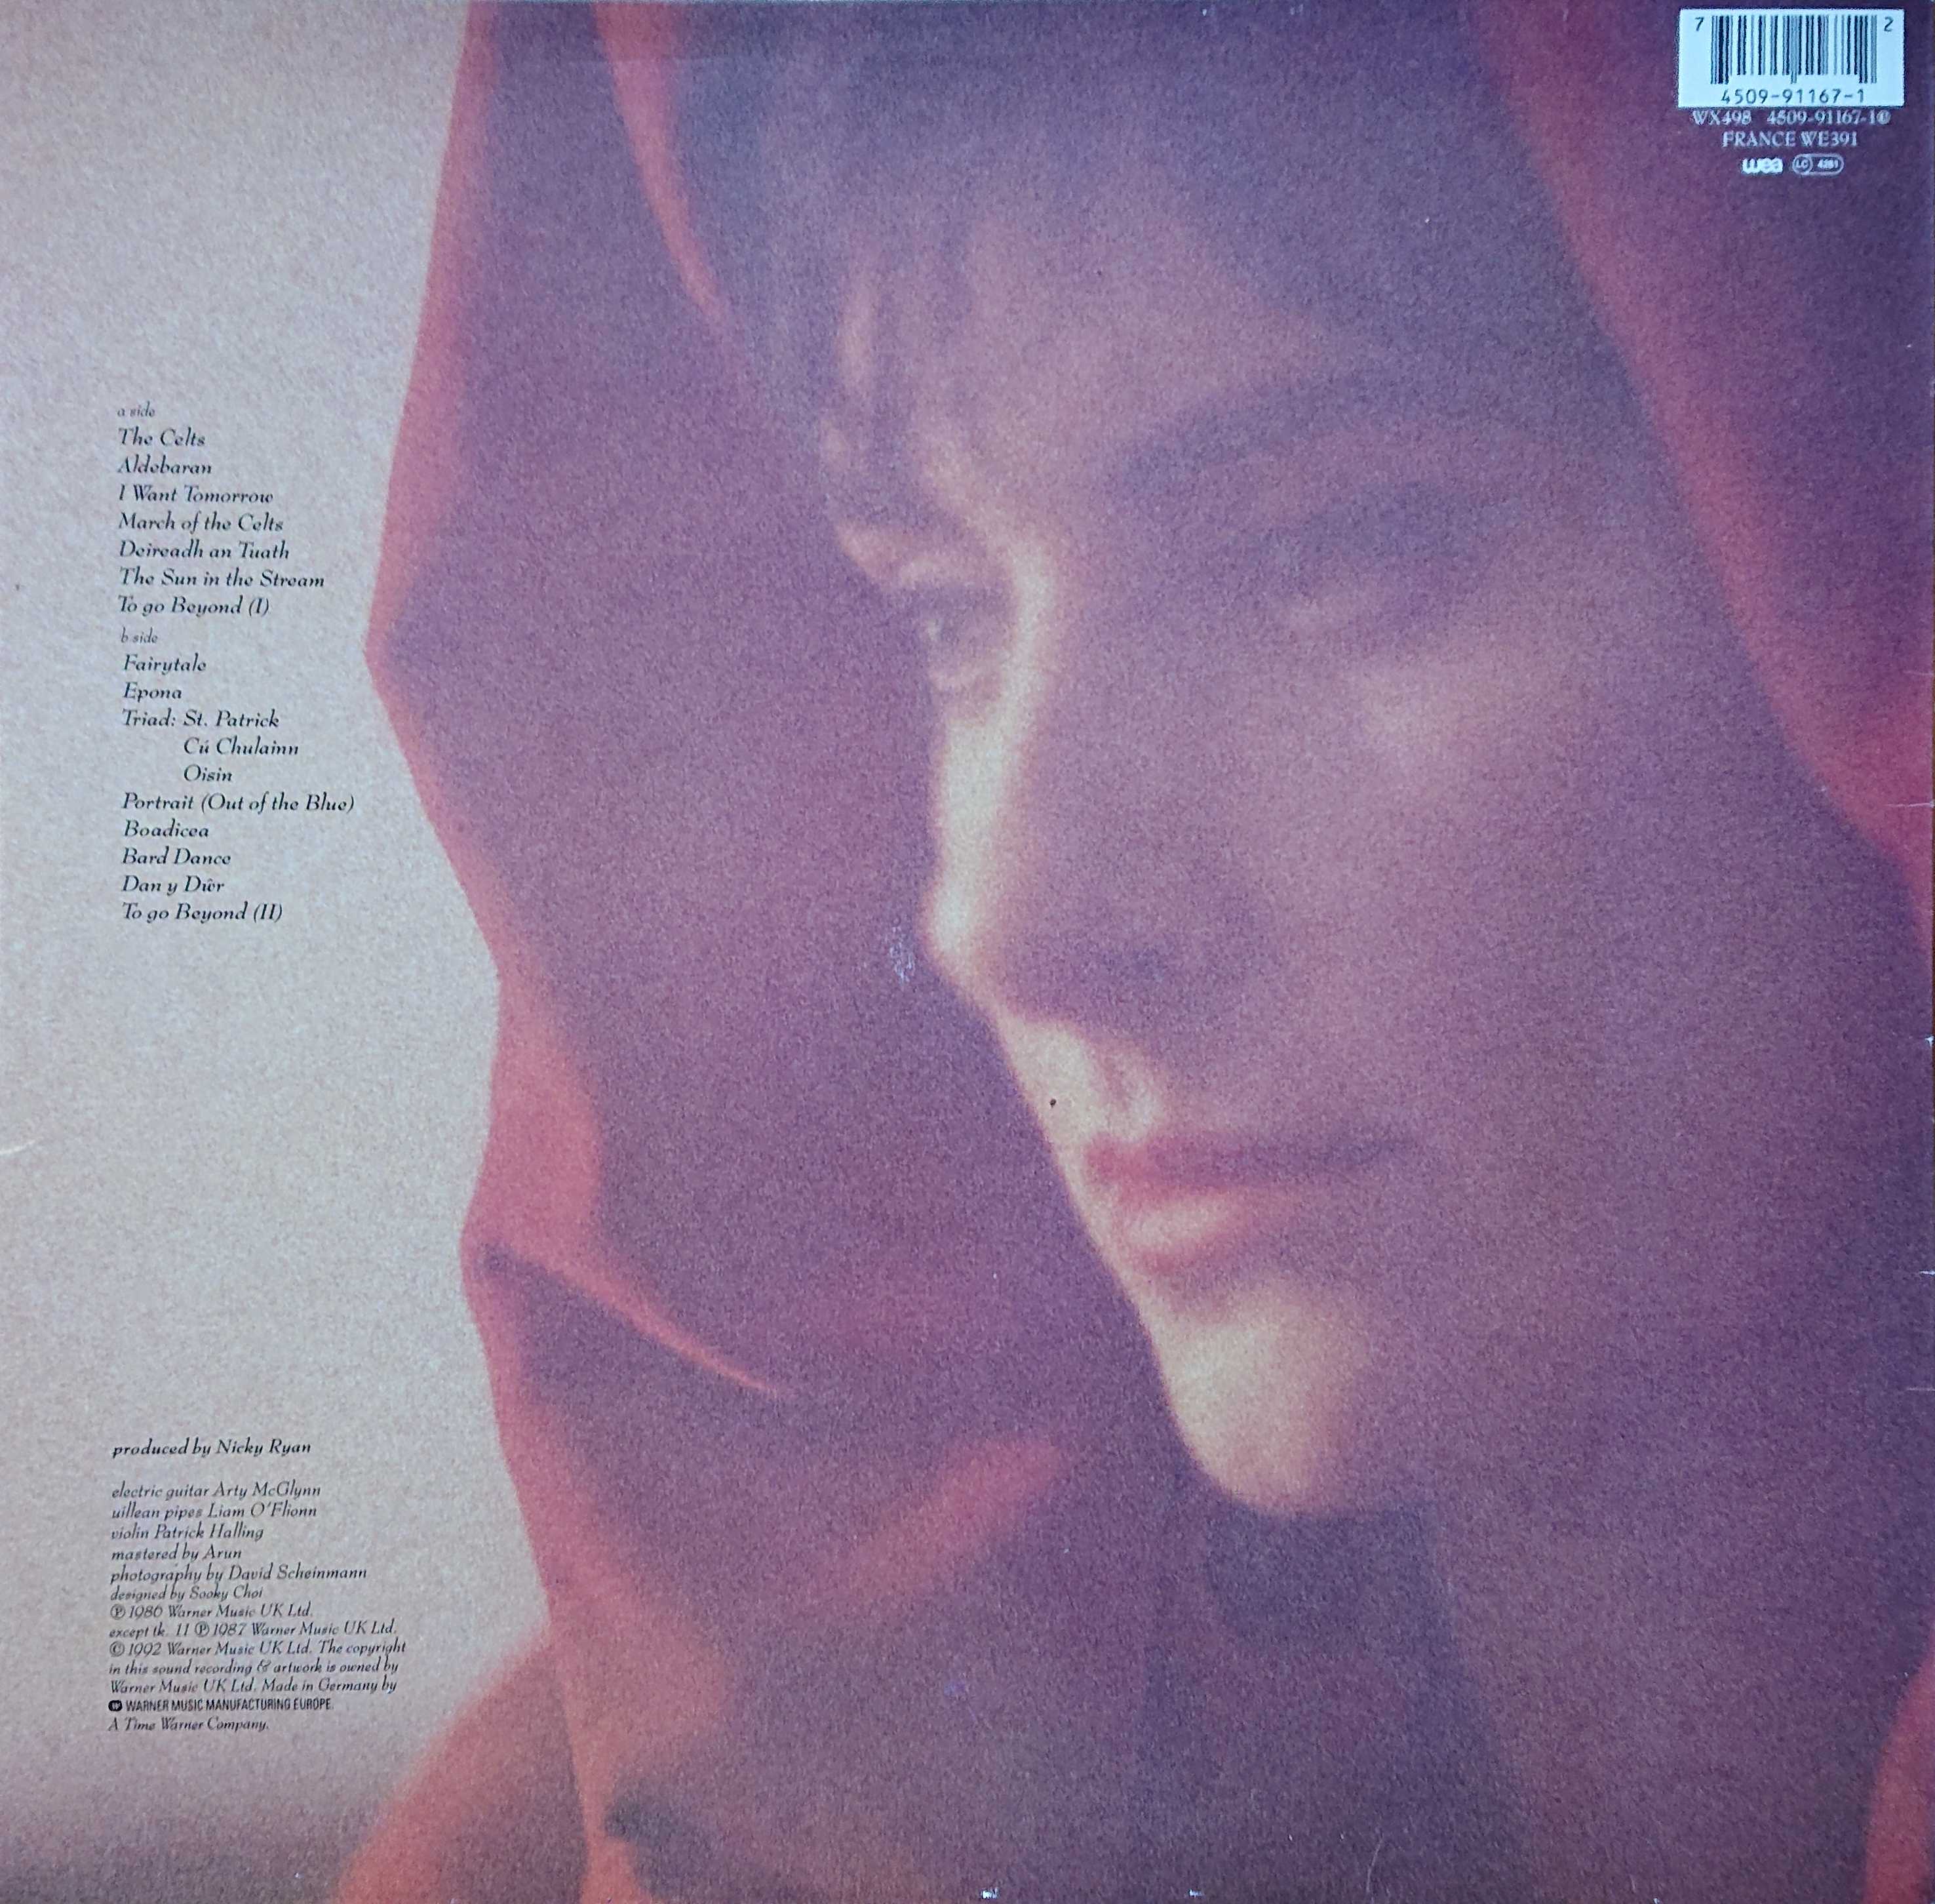 Picture of WX 498-iF The Celts by artist Enya / Roma Ryan from the BBC records and Tapes library